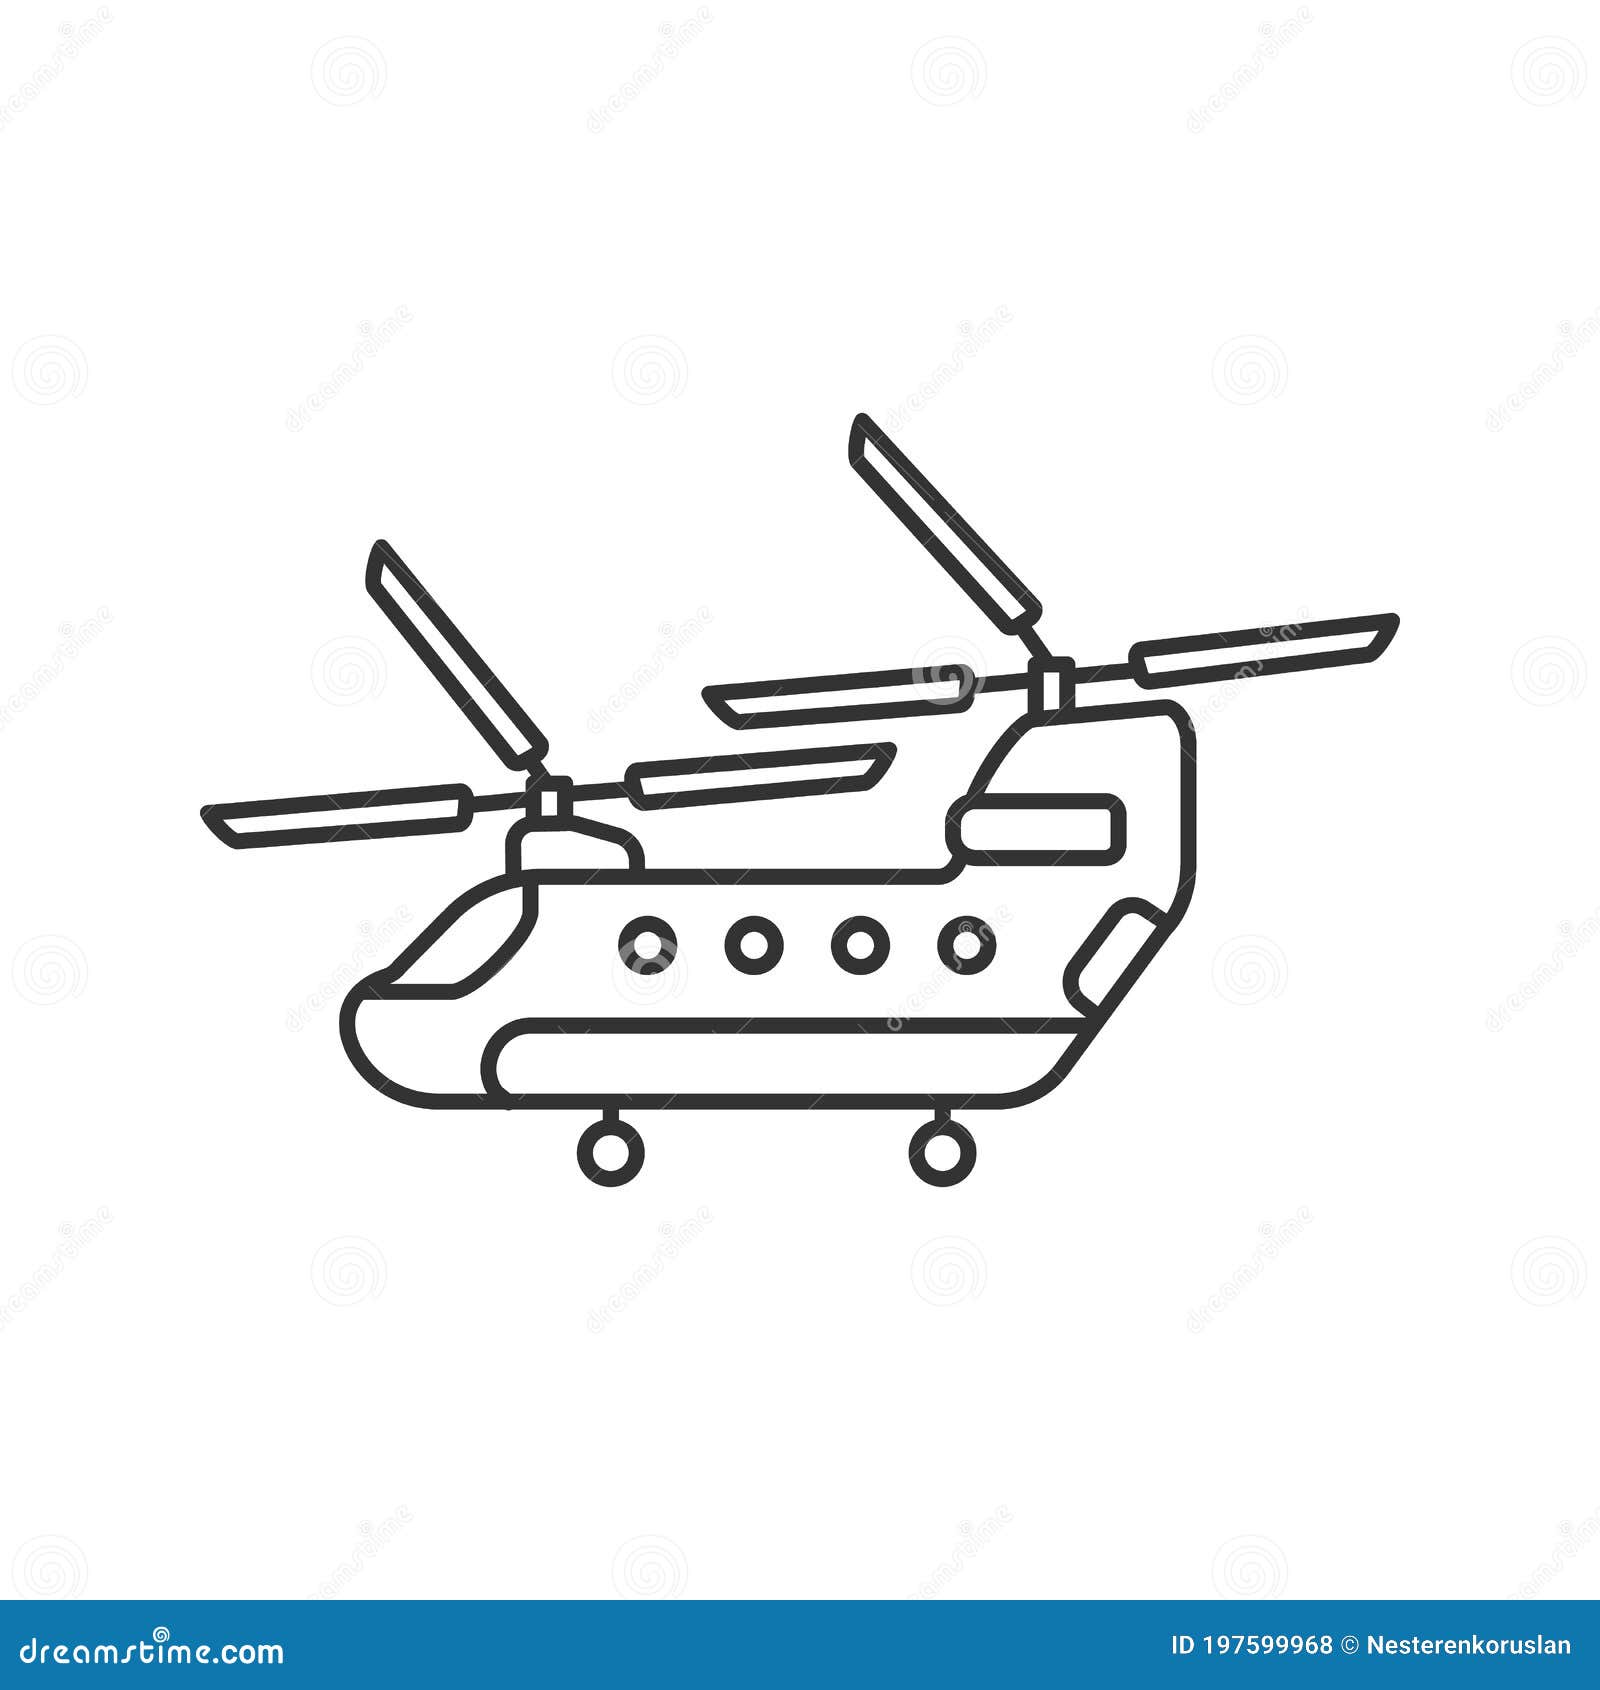 36 Helicopter Coloring Pages (Free PDF Printables)